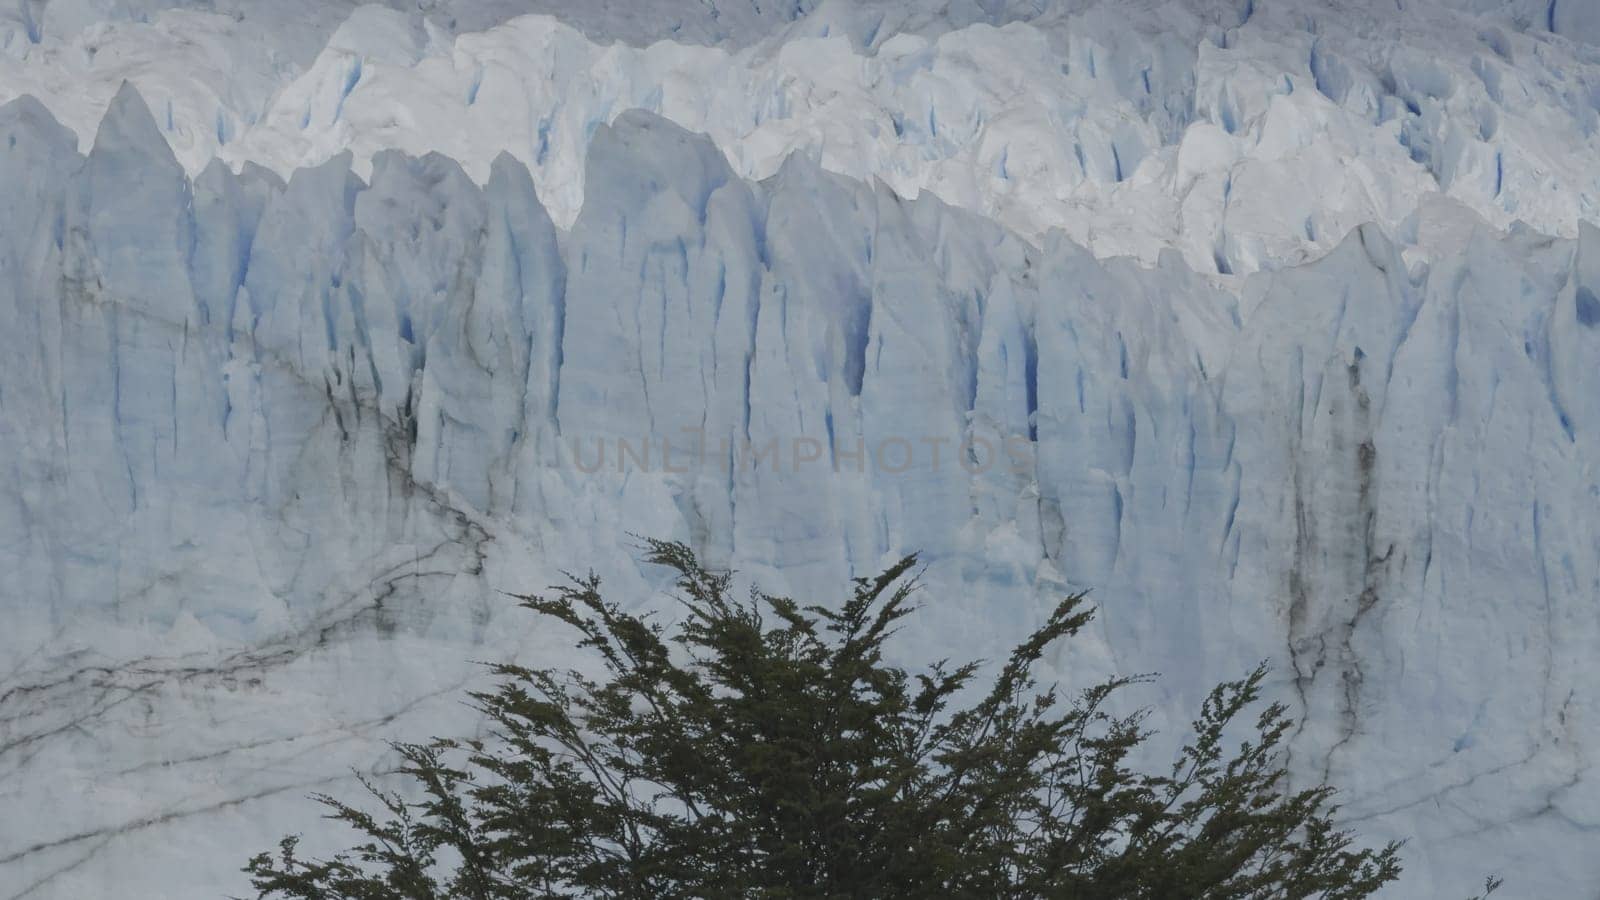 A green tree shudders against an icy glacier backdrop in slow-mo.